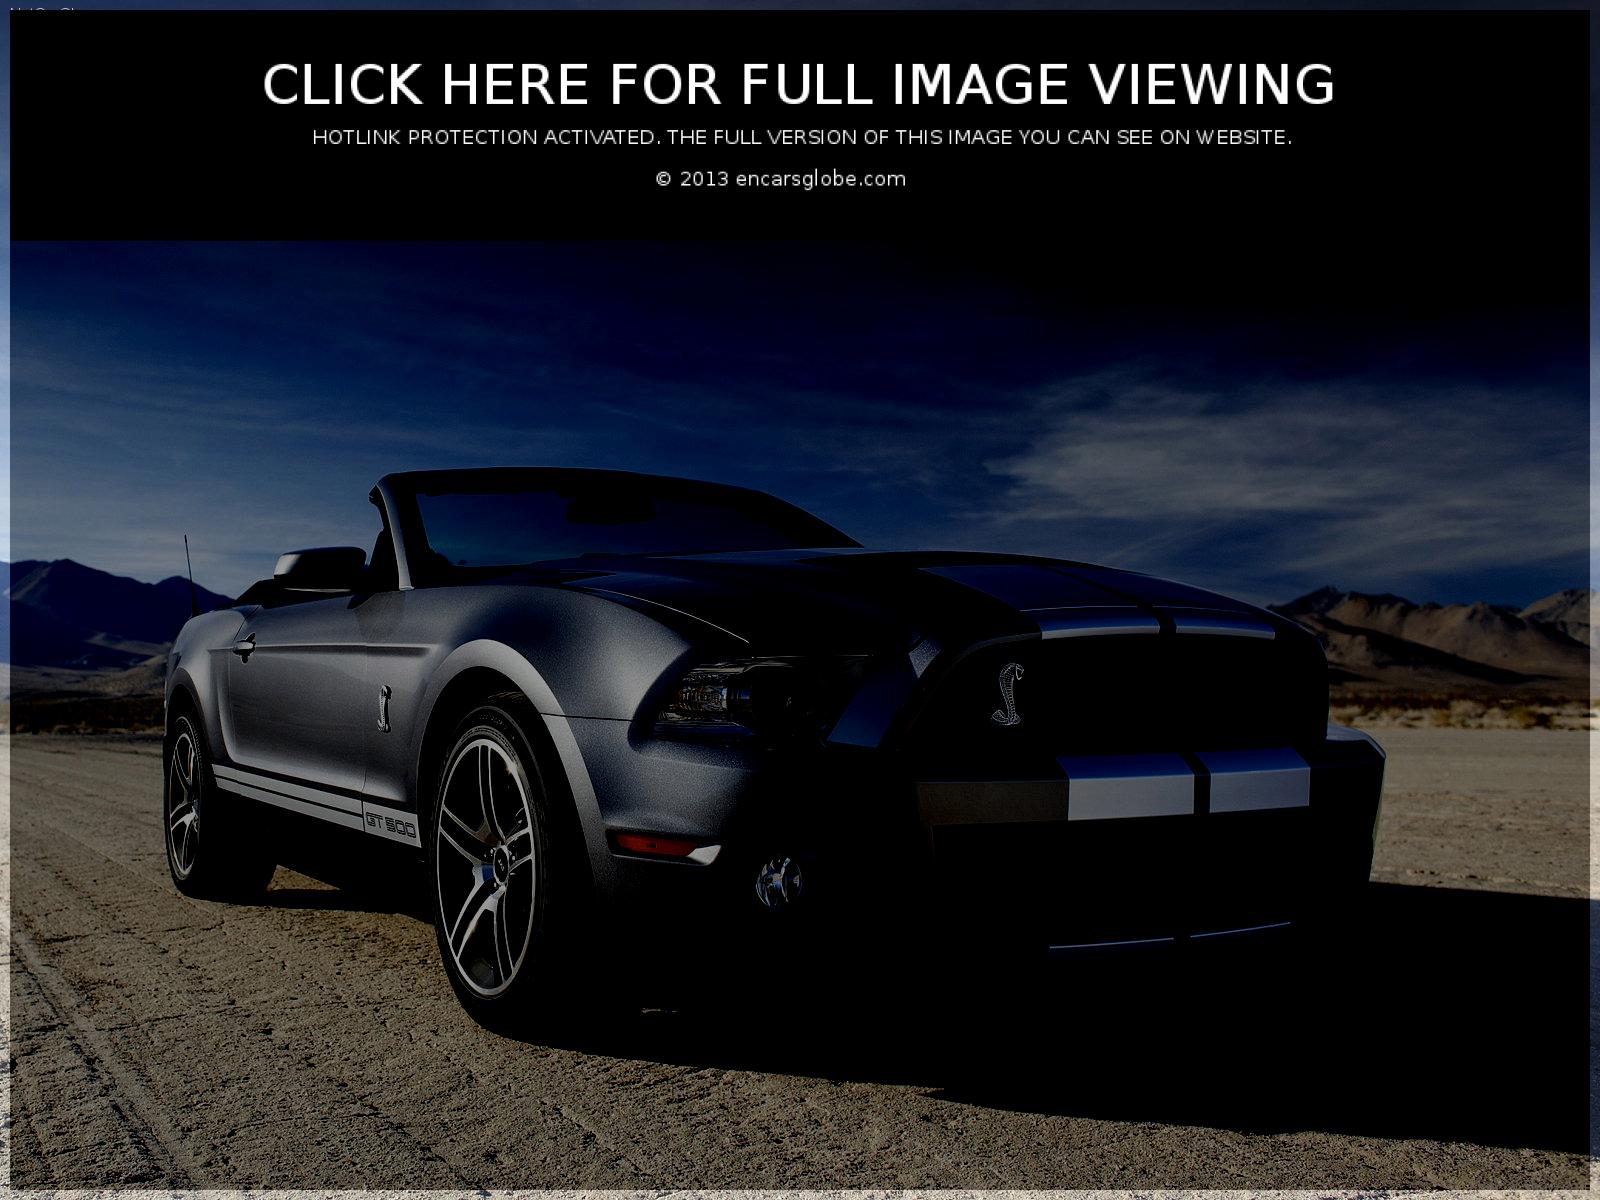 Shelby GT 500 conv Photo Gallery: Photo #02 out of 12, Image Size ...